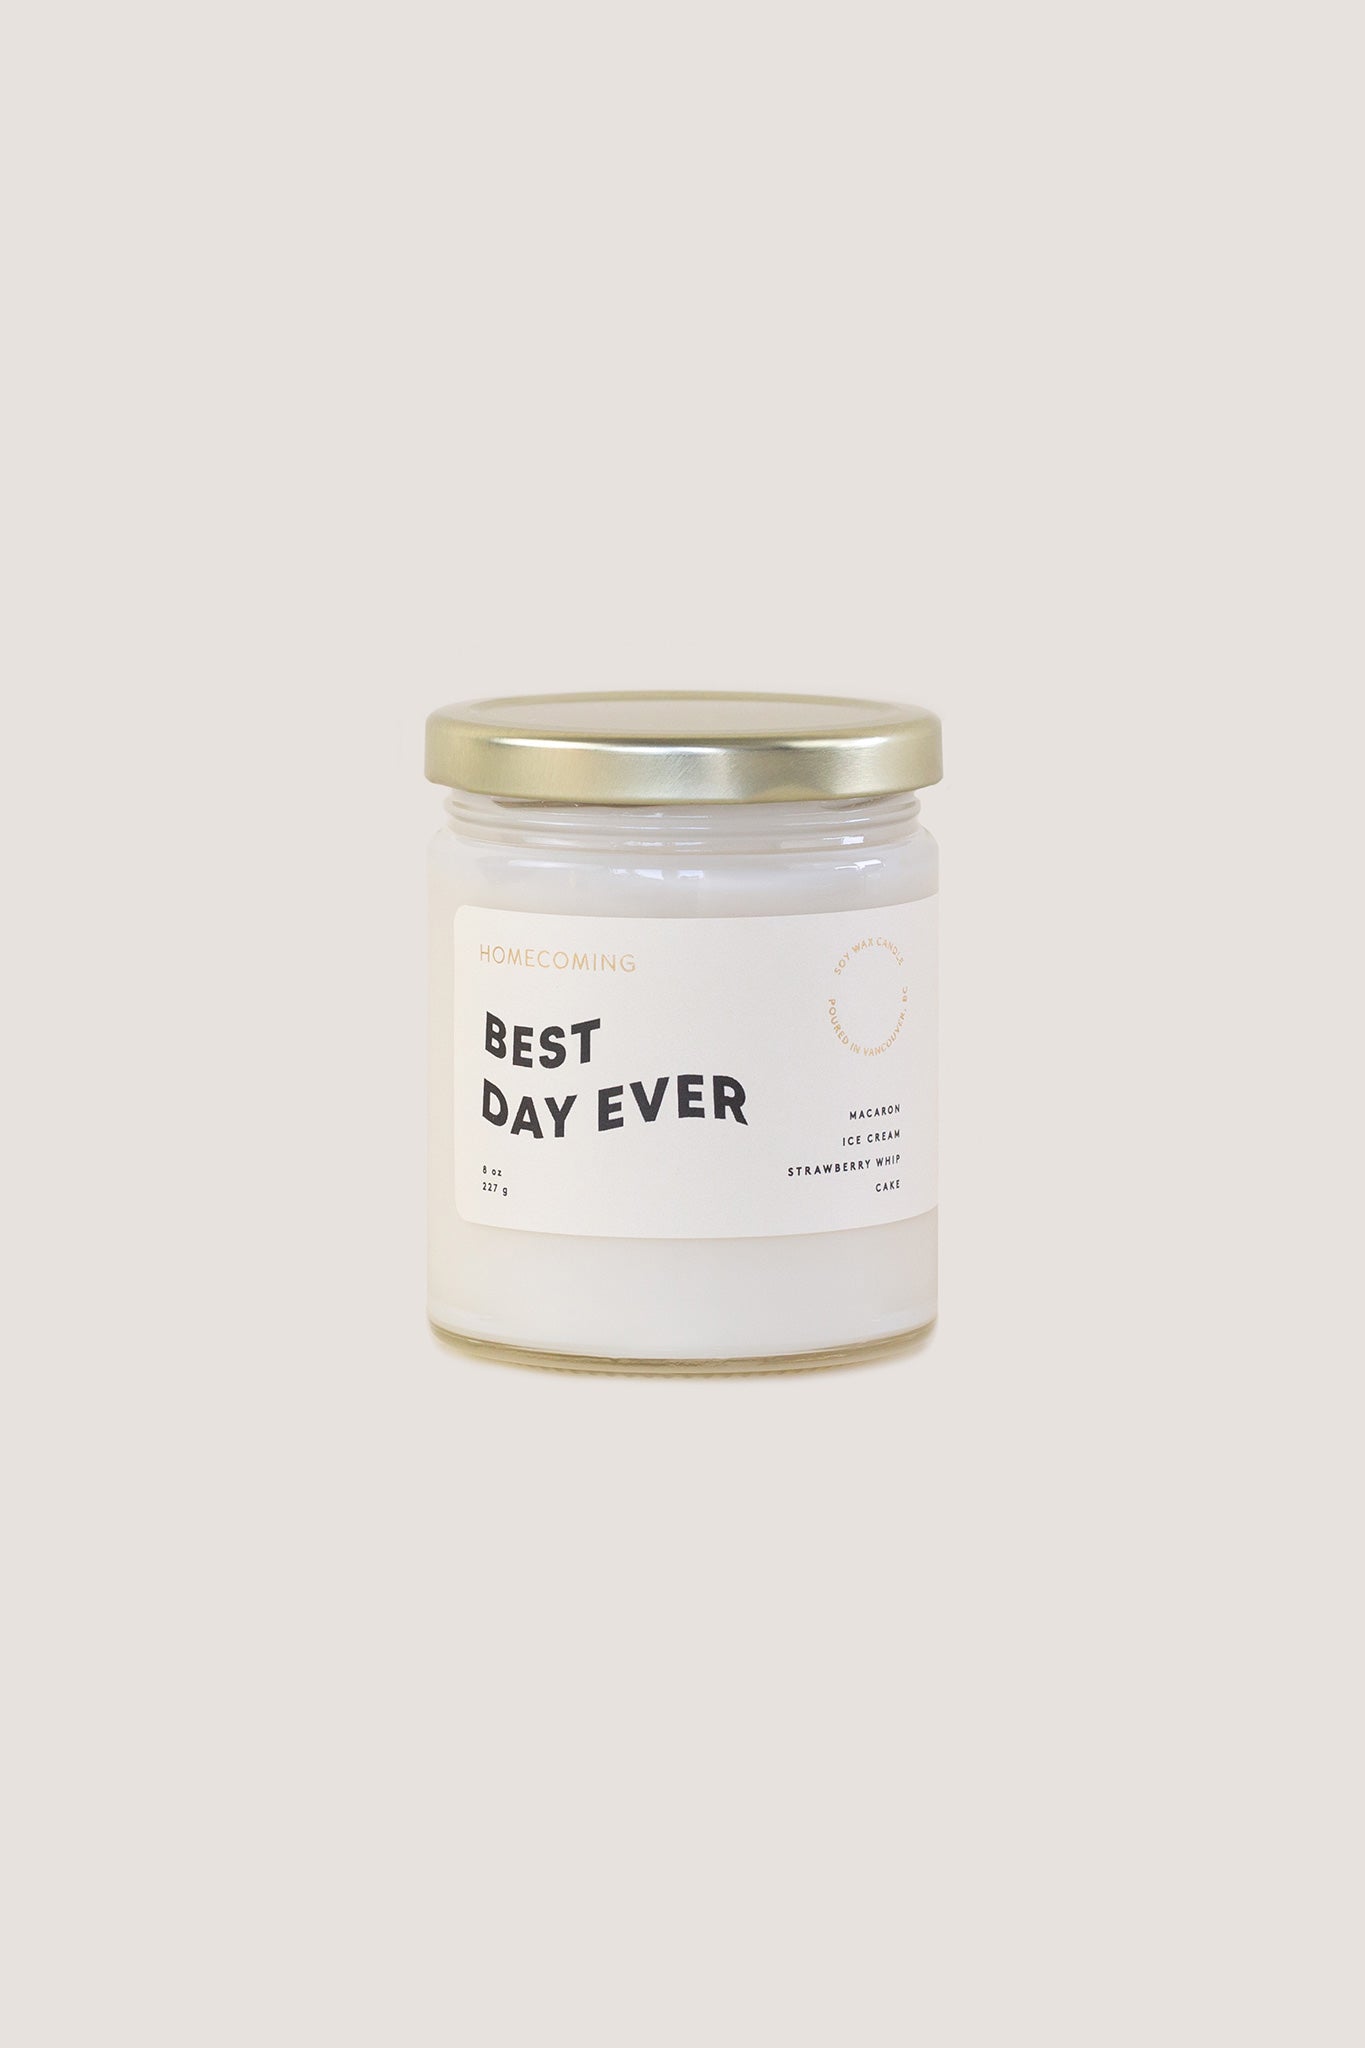 Best Day Ever Candle Accessories Homecoming Candles   